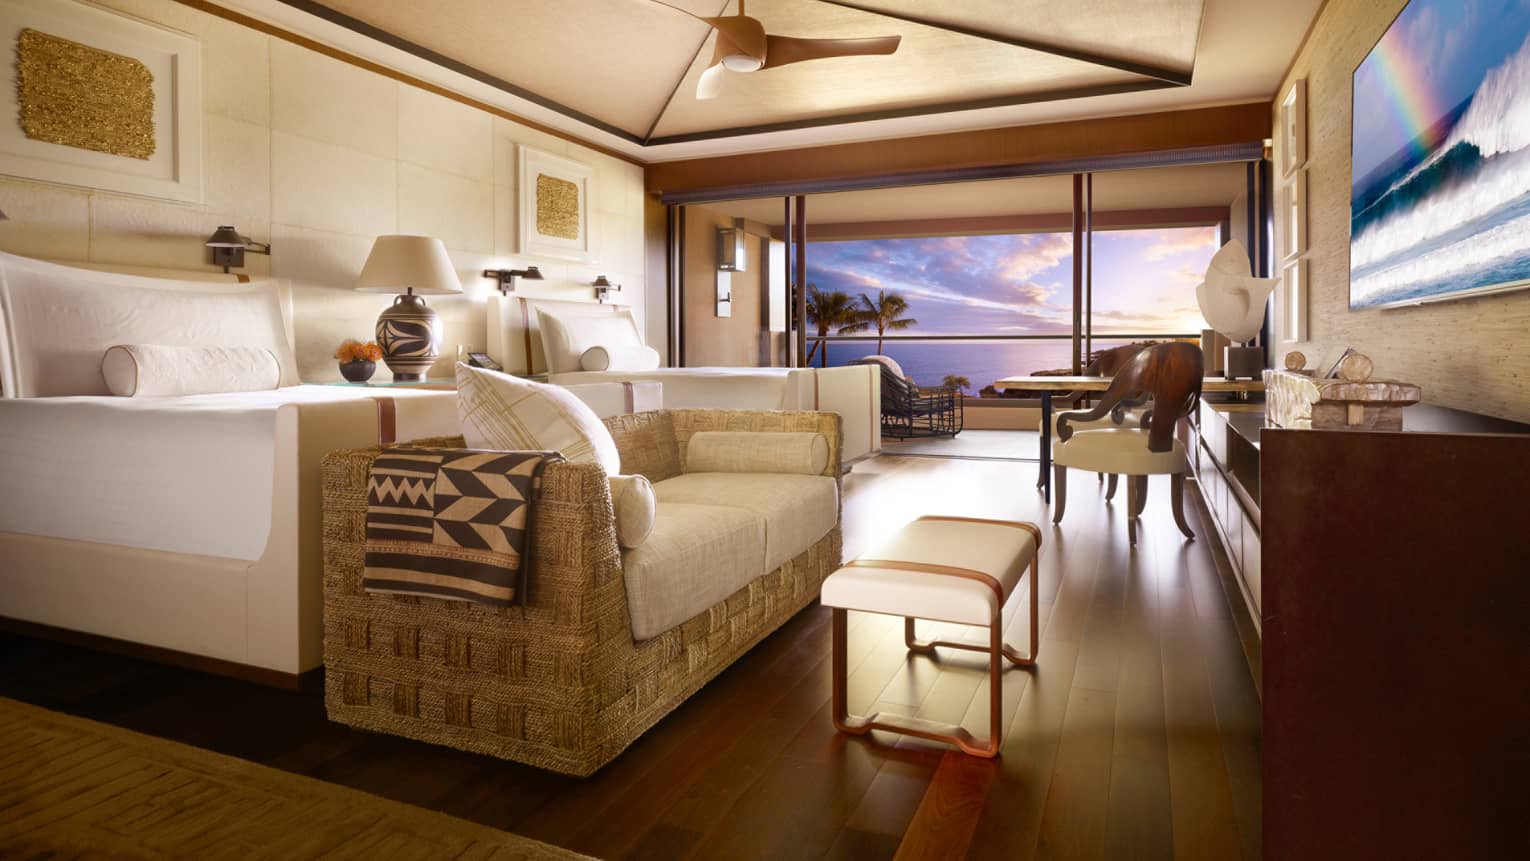 Ocean-View Room bed with loveseat, table at foot by open wall to balcony, sunset